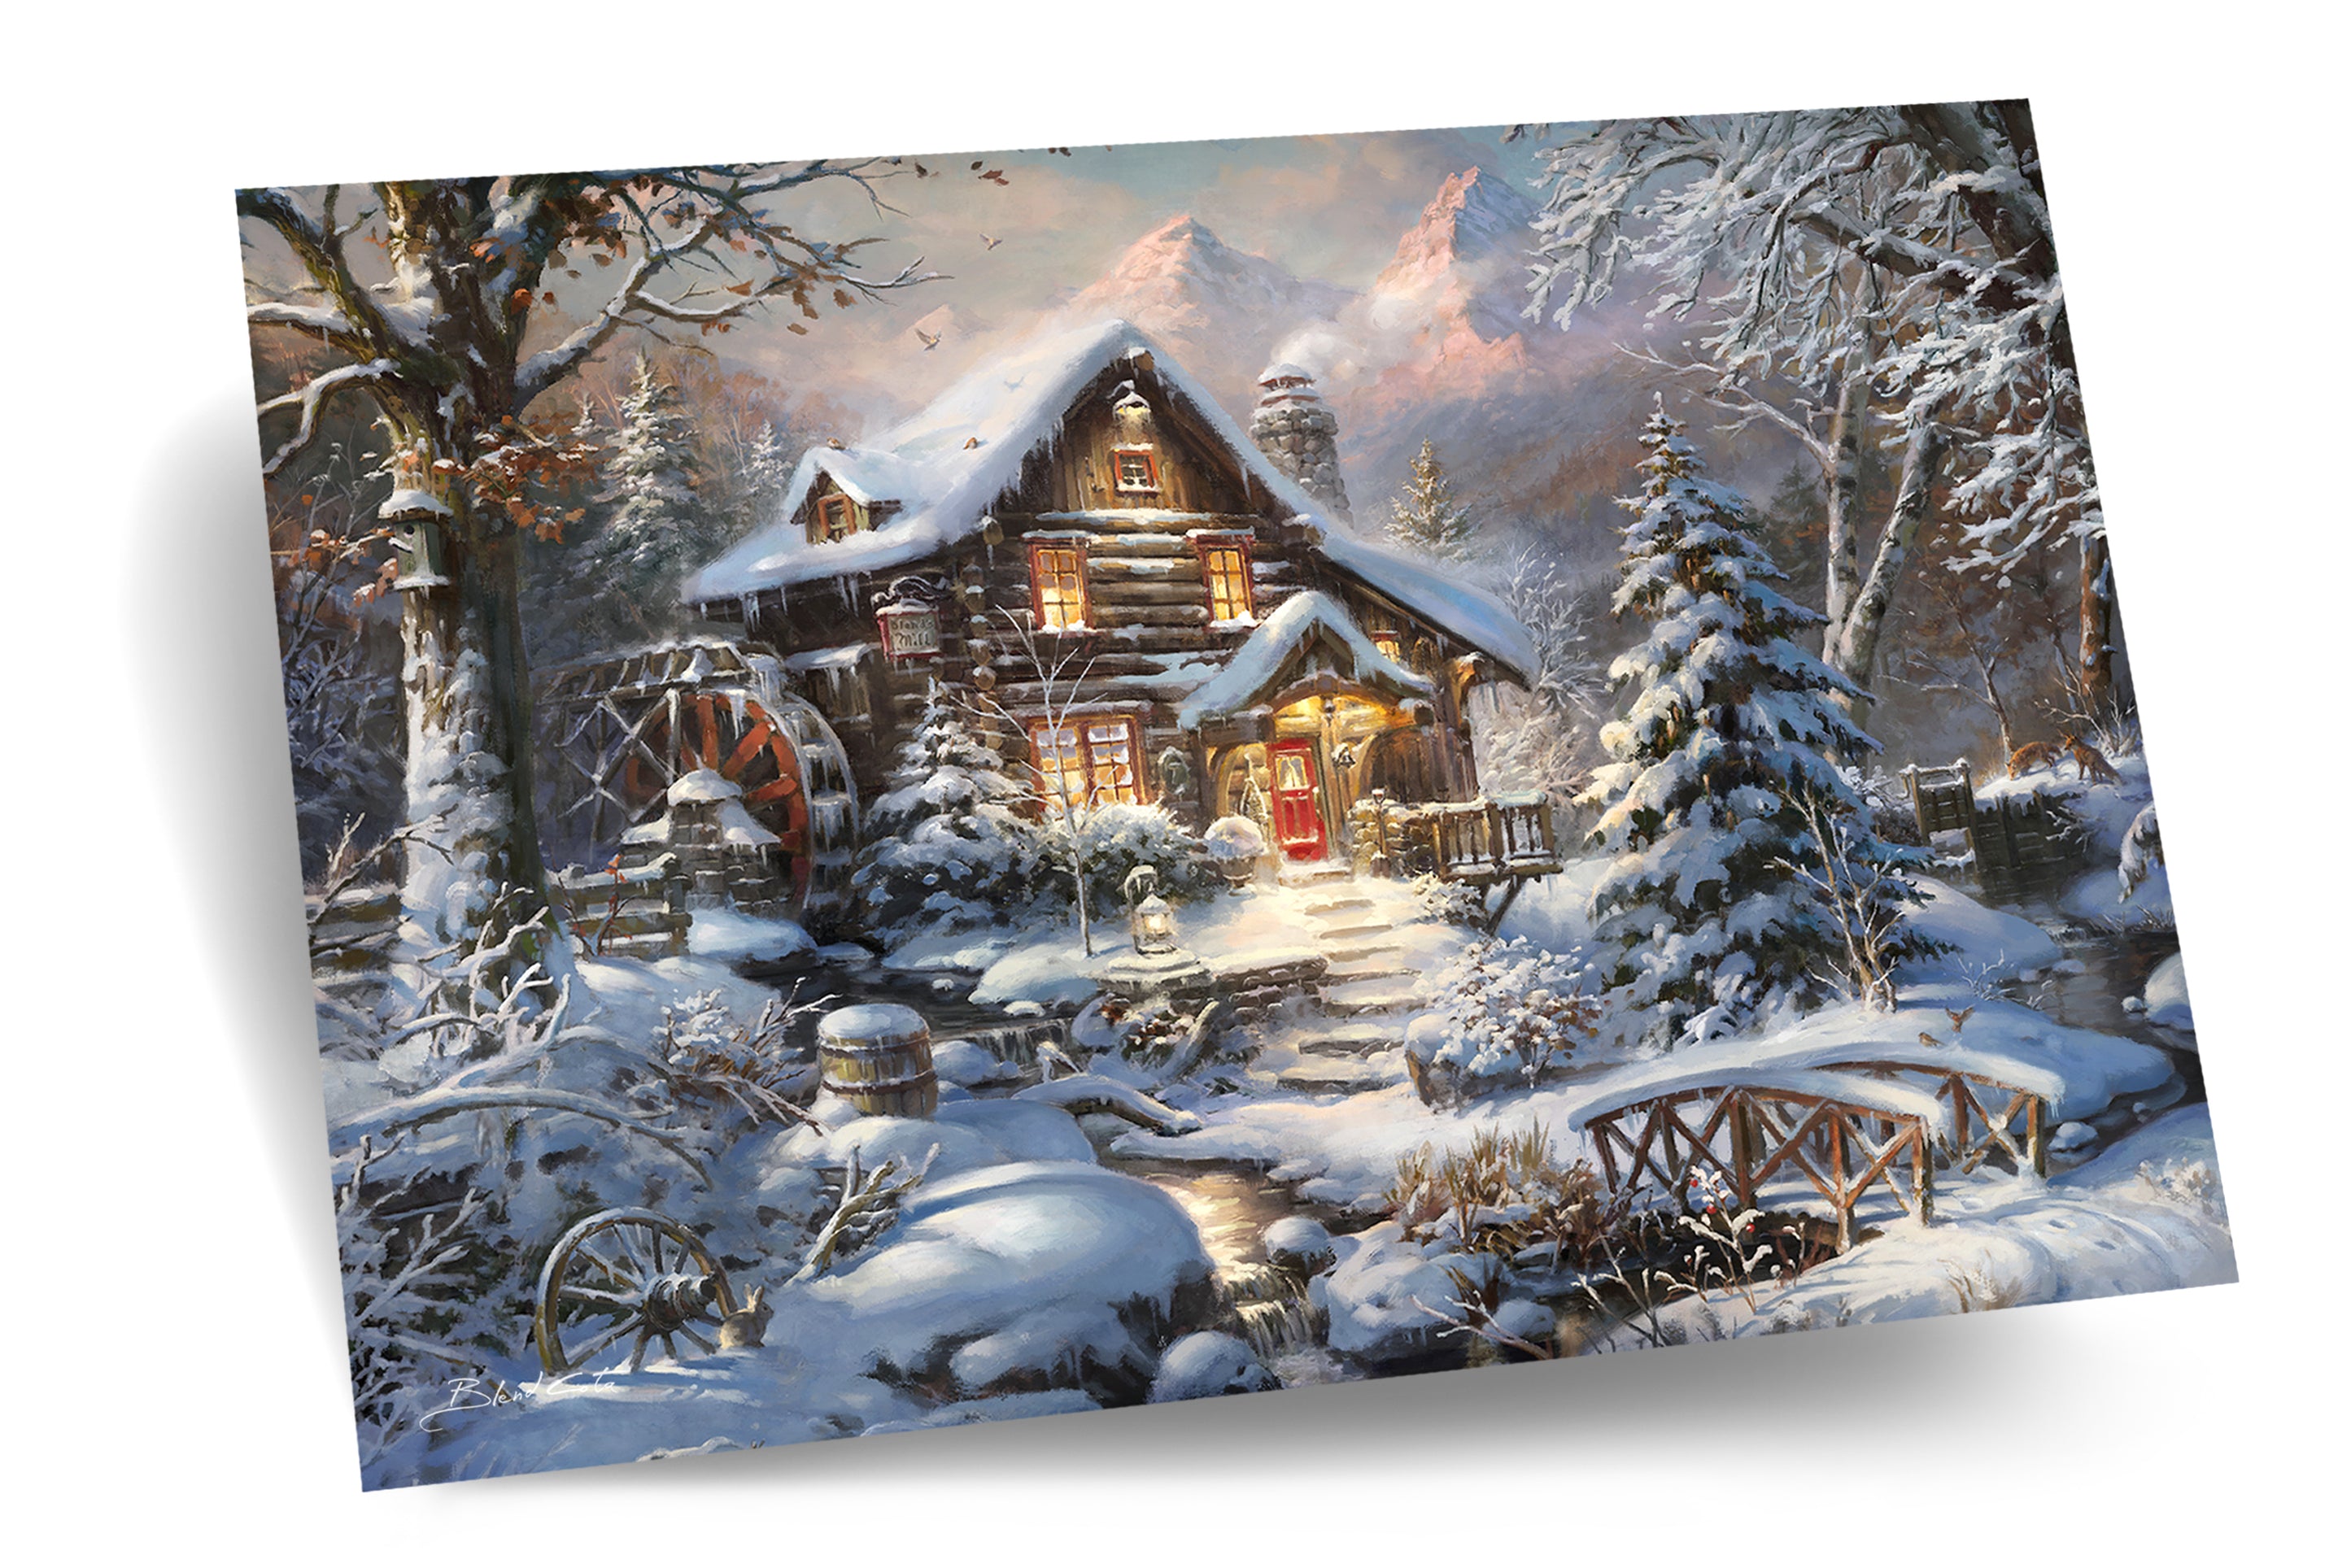 A soft blanket of snow cover this cozy wooden cabin in the woods, the mill is frozen for now, but warmth is inside this retreat from busy life, painting in a realistic style.